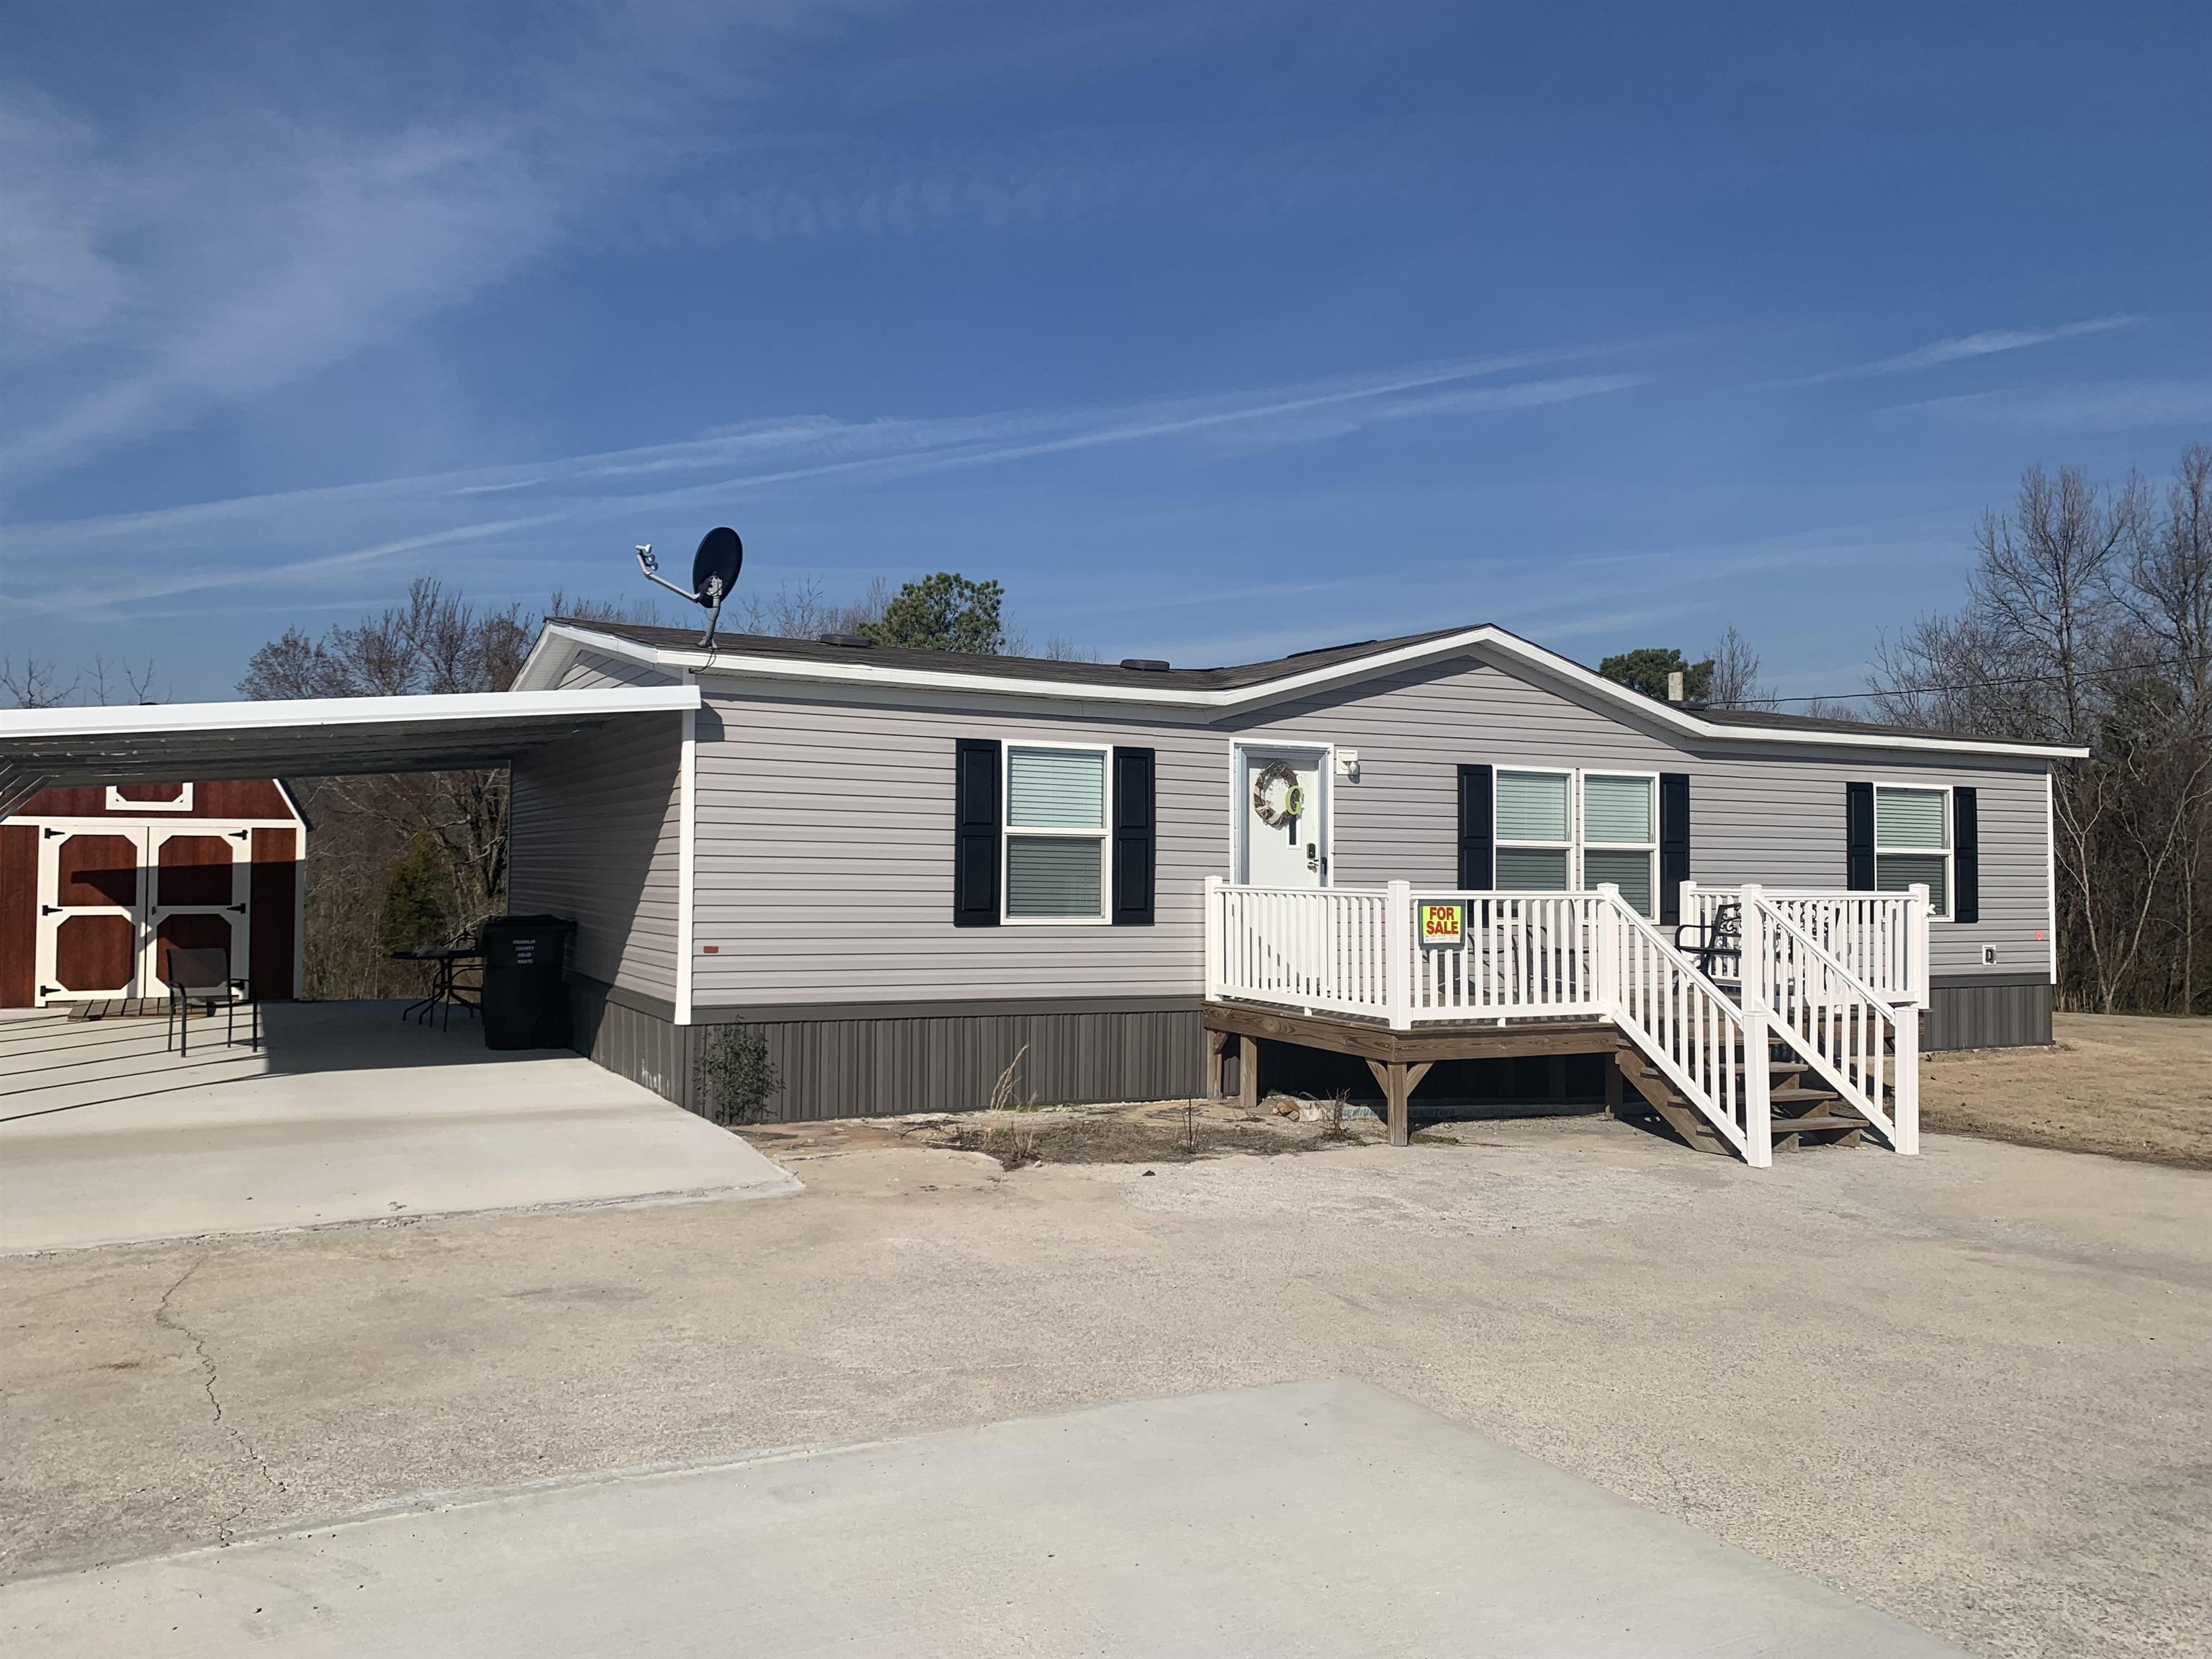 This is a brand new manufactured home sitting on 1.18 acres out in the country.  I must admit this is a gorgeous place with plenty of space  Sitting in a great little country community with the peace and quite your family has been searching for.  If you or anyone you know is looking for a nice home this one is it.  Call us today for your private showing.